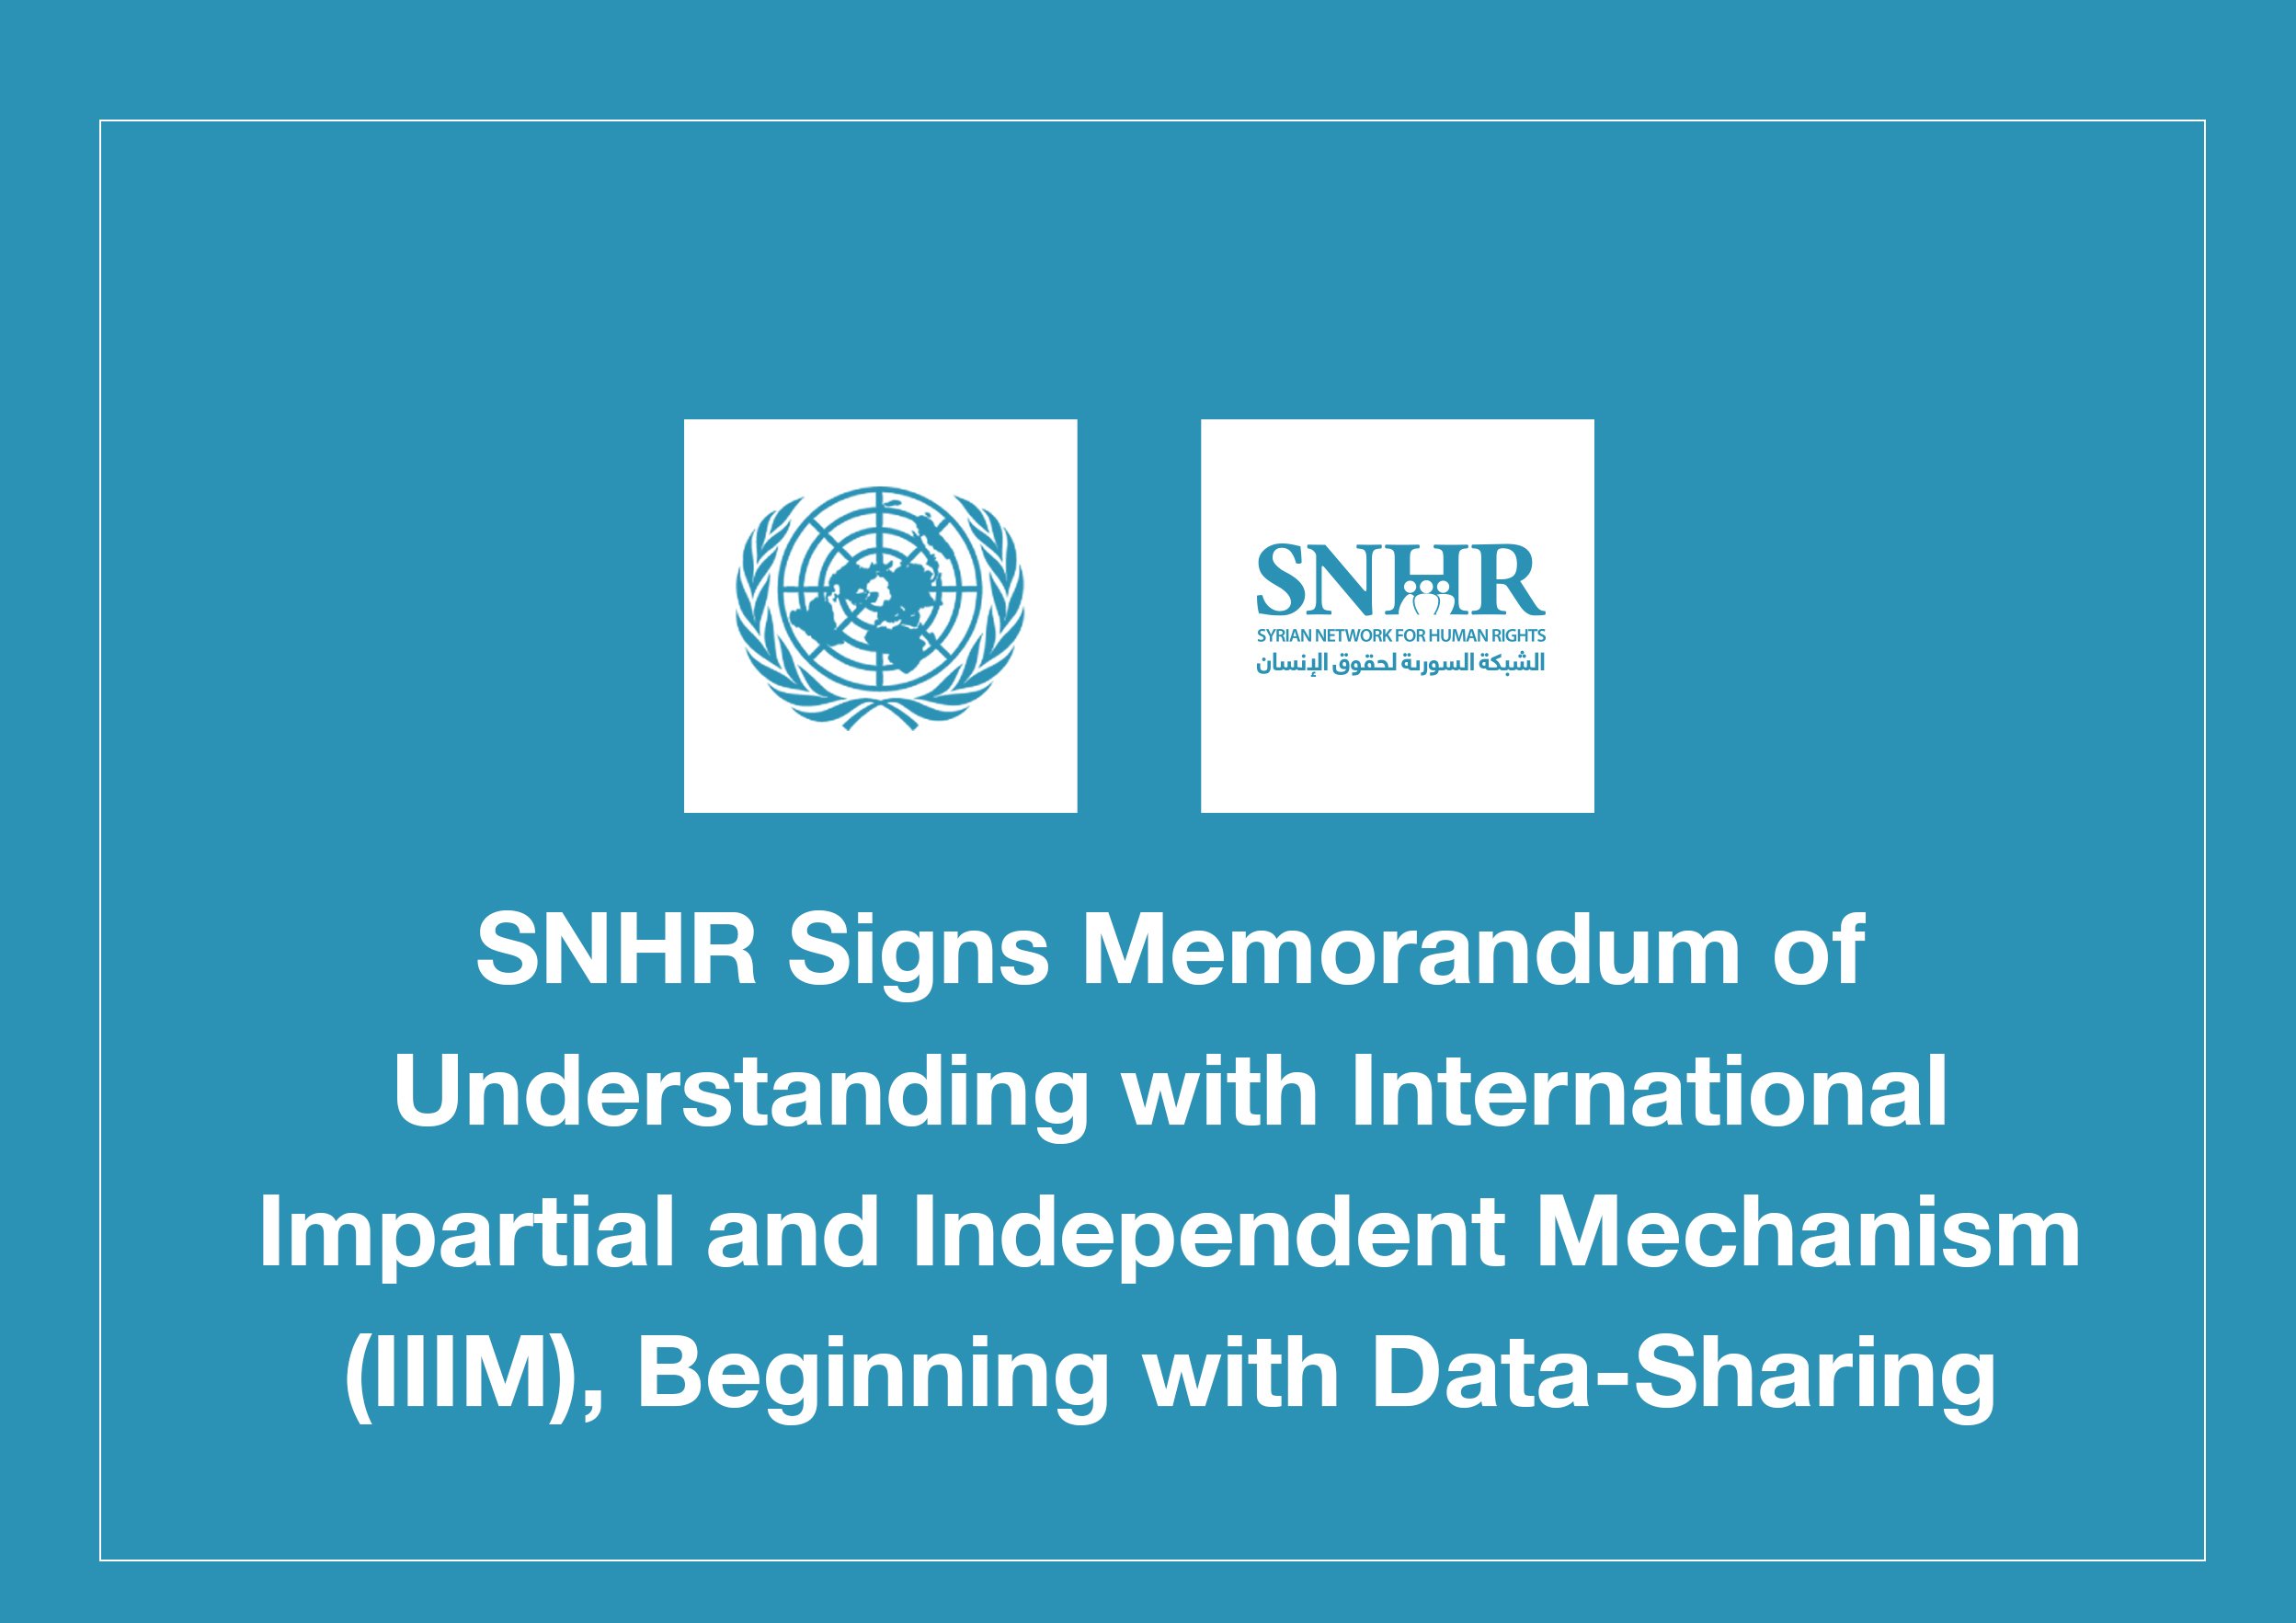 The SNHR Signs Memorandum of Understanding with International Impartial and Independent Mechanism (IIIM), Beginning with Data-Sharing